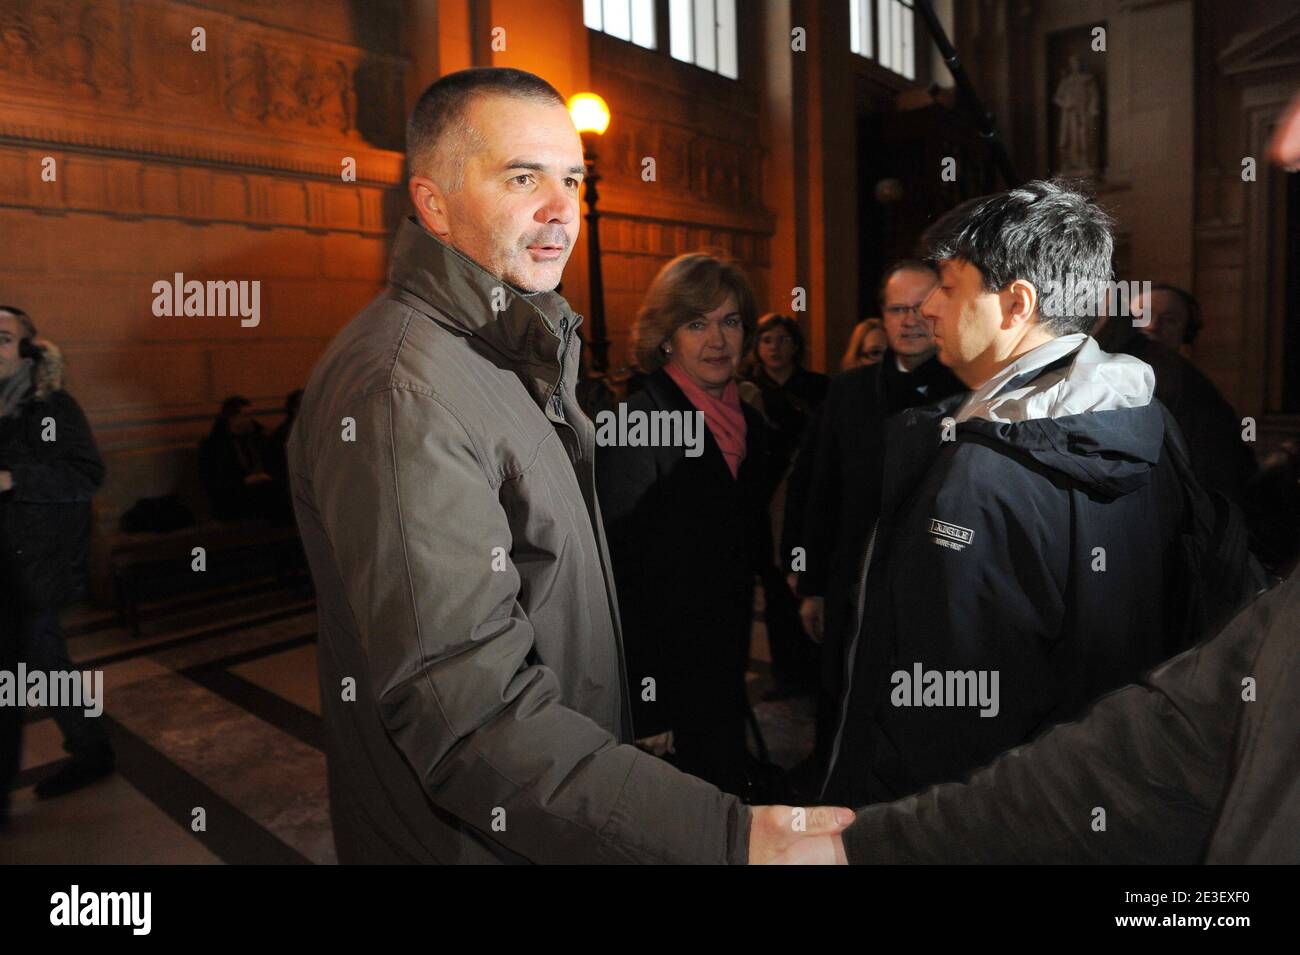 Stephane Colonna, brother of Yvan Colonna, arrives to the Paris courthouse to attend the Yvan Colonna Trial, in Paris, France, on February 9, 2009. Photo by Mousse/ABACAPRESS.COM Stock Photo